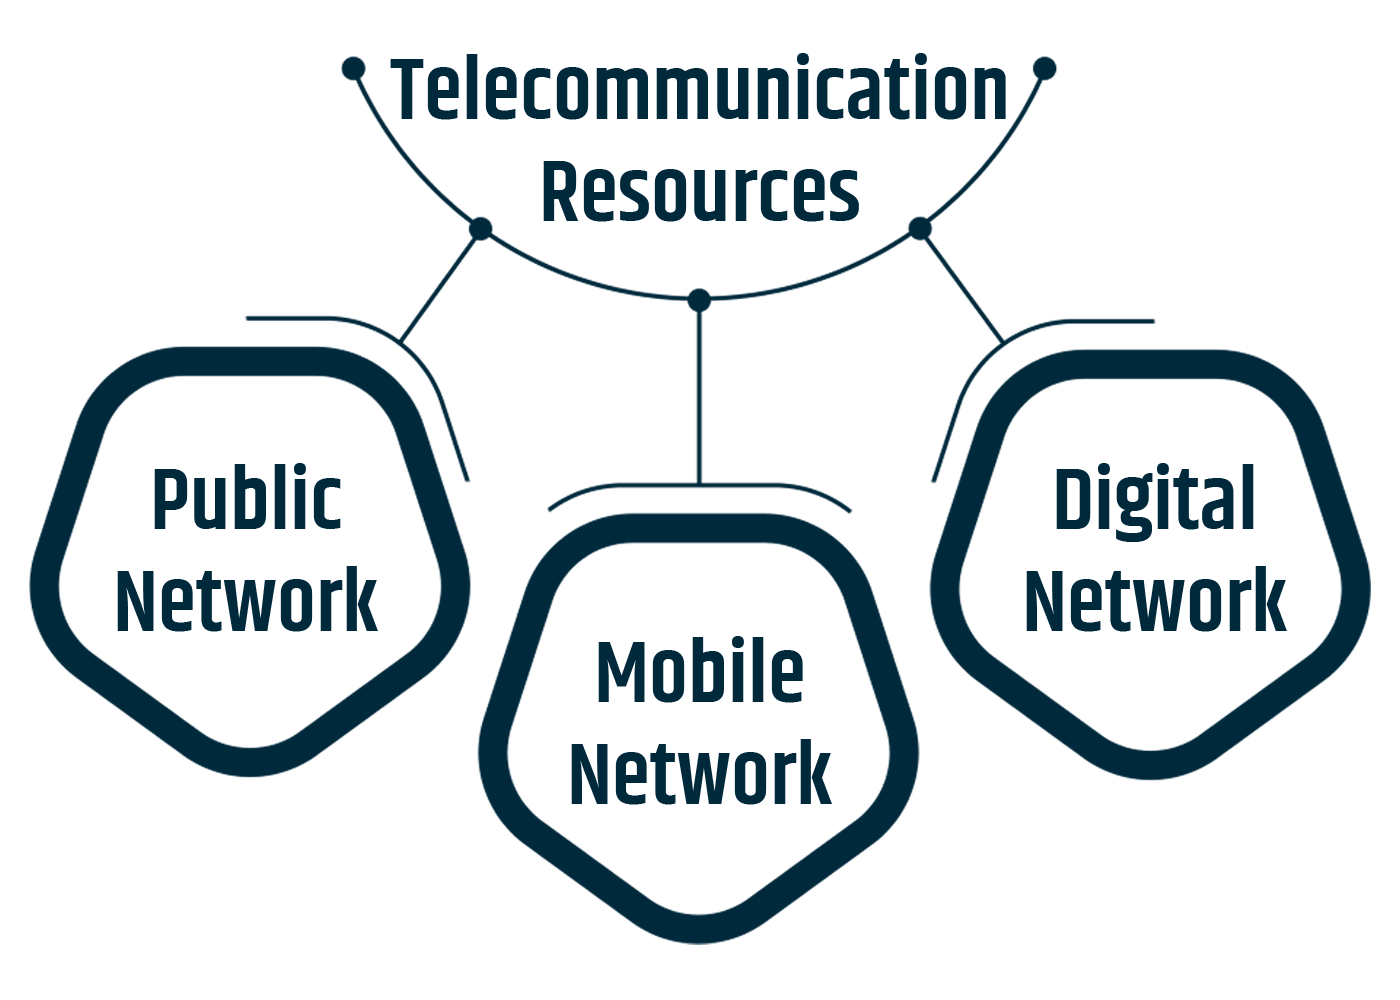 there are multipe resources of telecommunication that are Public Network, Mobile Network, Digital Network and other telecommunication resources.